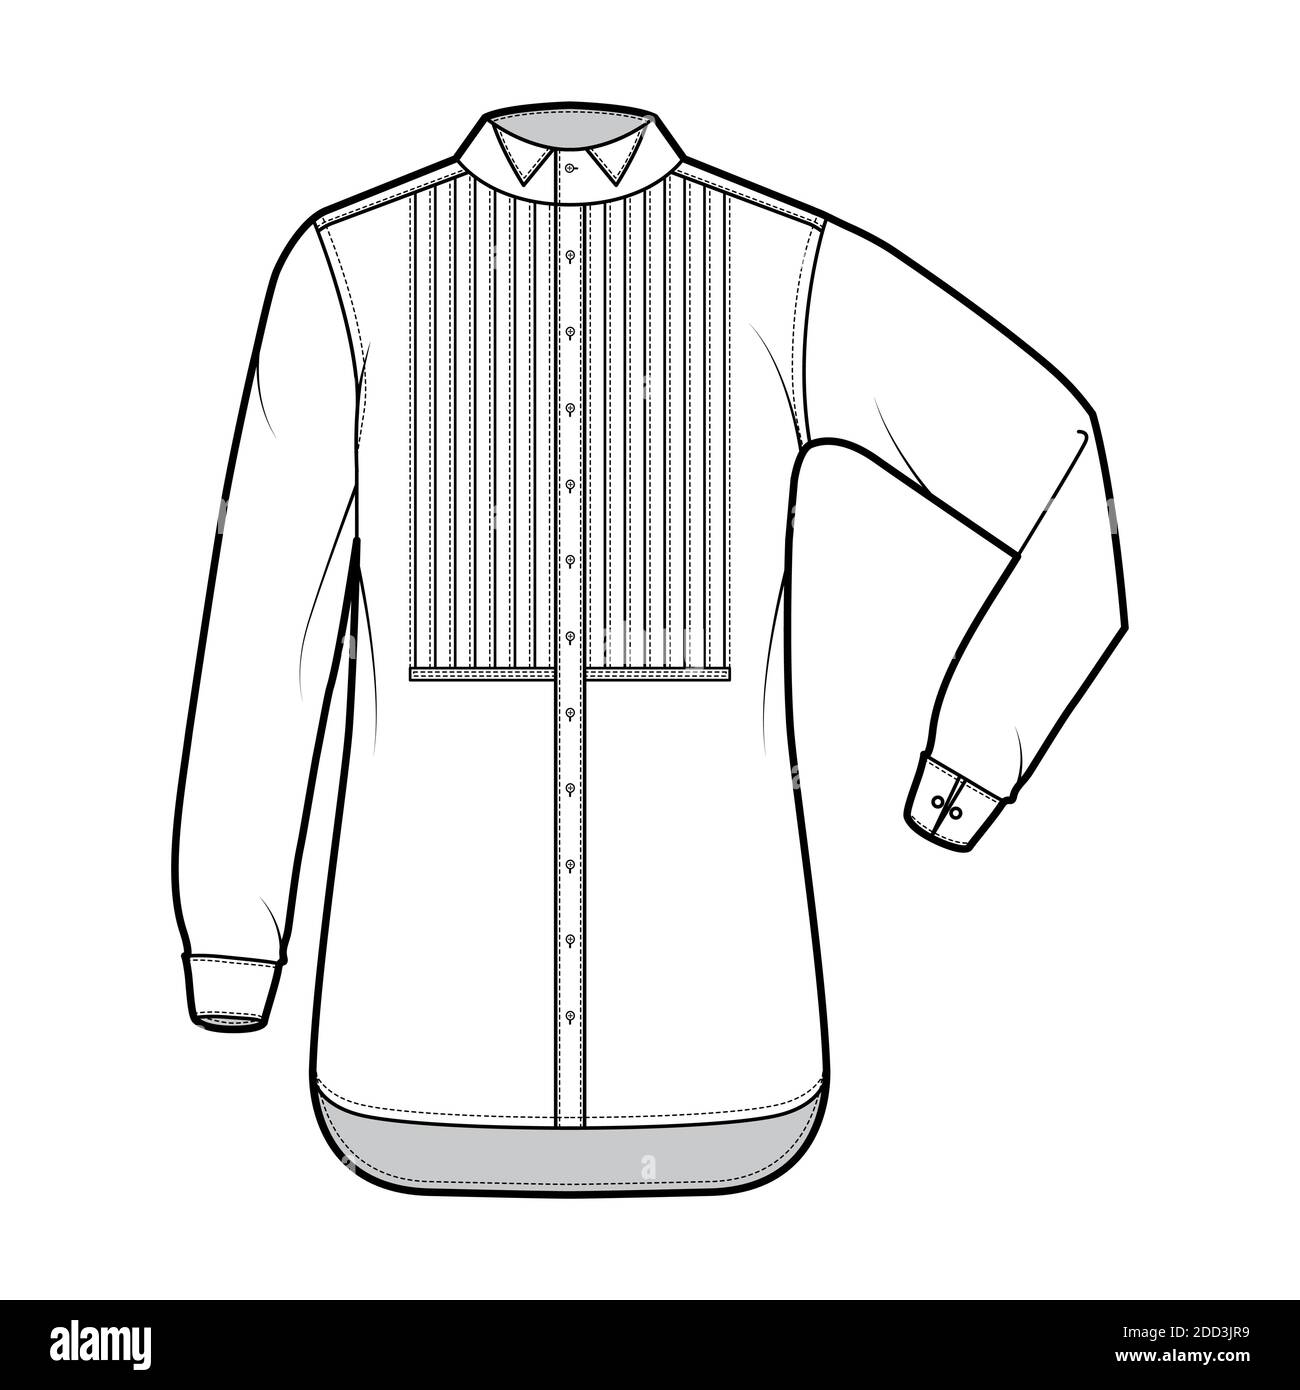 Shirt tuxedo dress technical fashion illustration with pleated pintucked bib, elbow fold long sleeves with french cuff, wing collar. Flat template front white color. Women men unisex top CAD Stock Vector